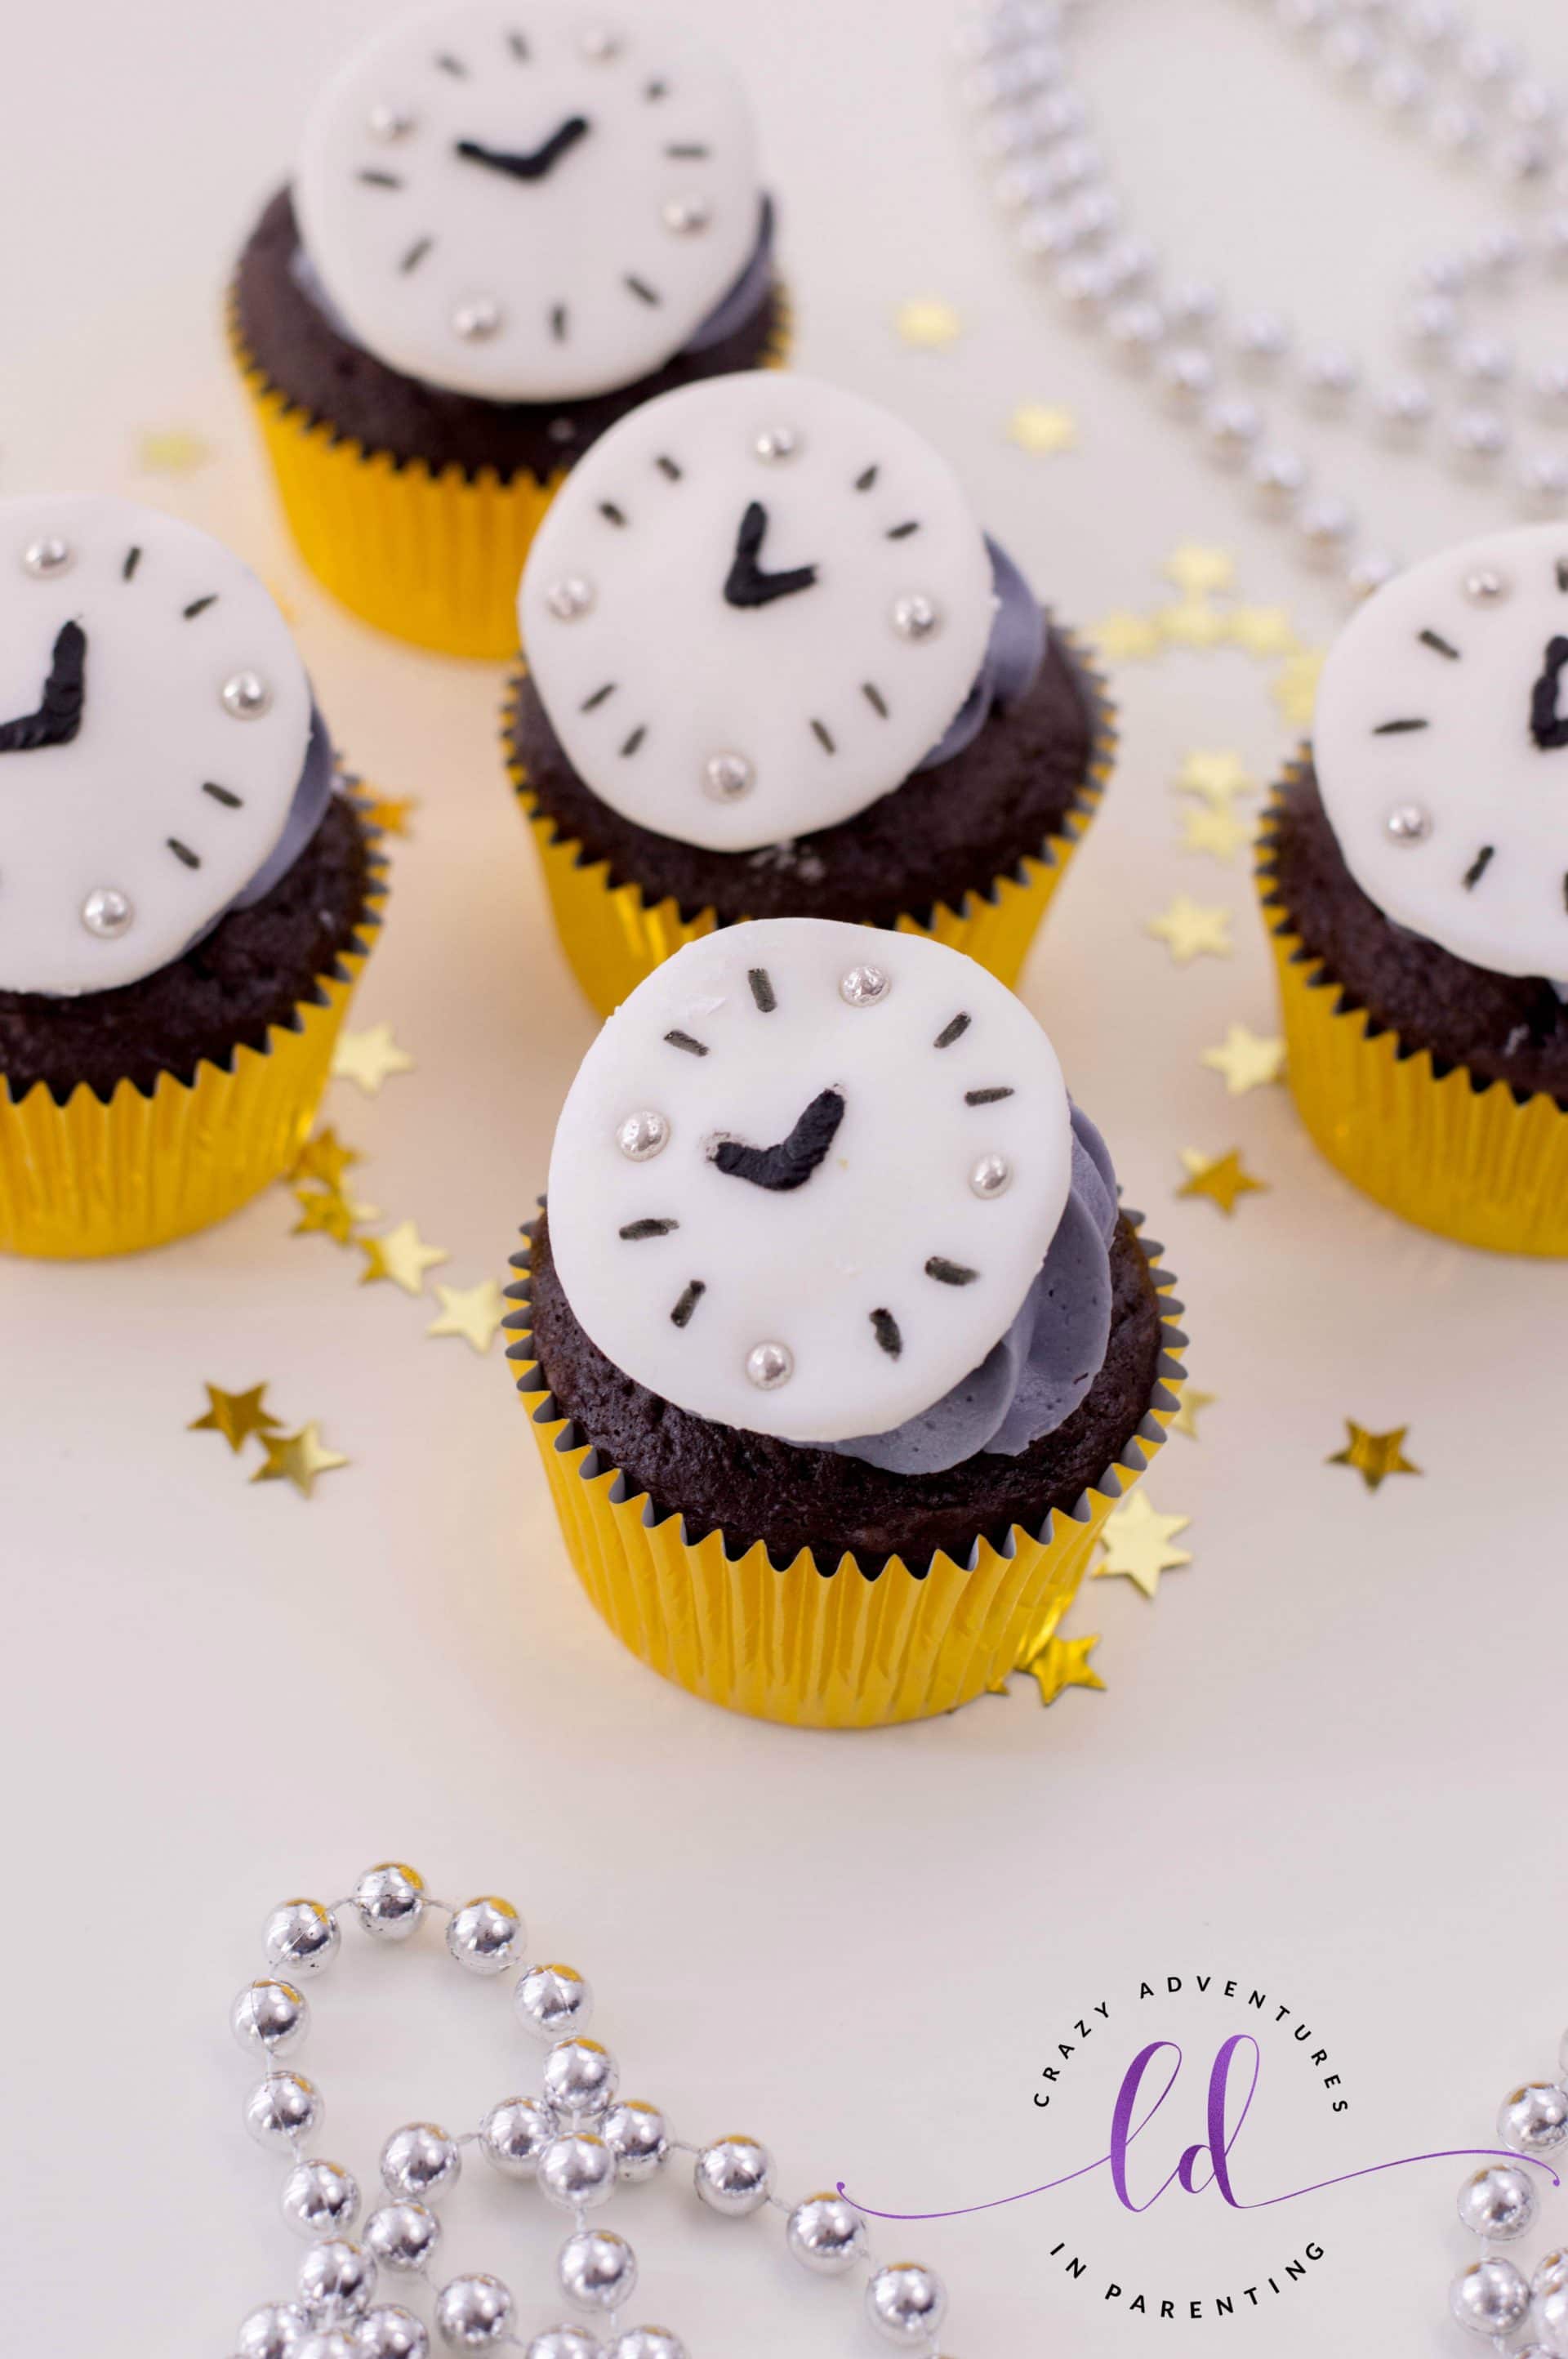 Countdown Cupcakes to Celebrate New Year's